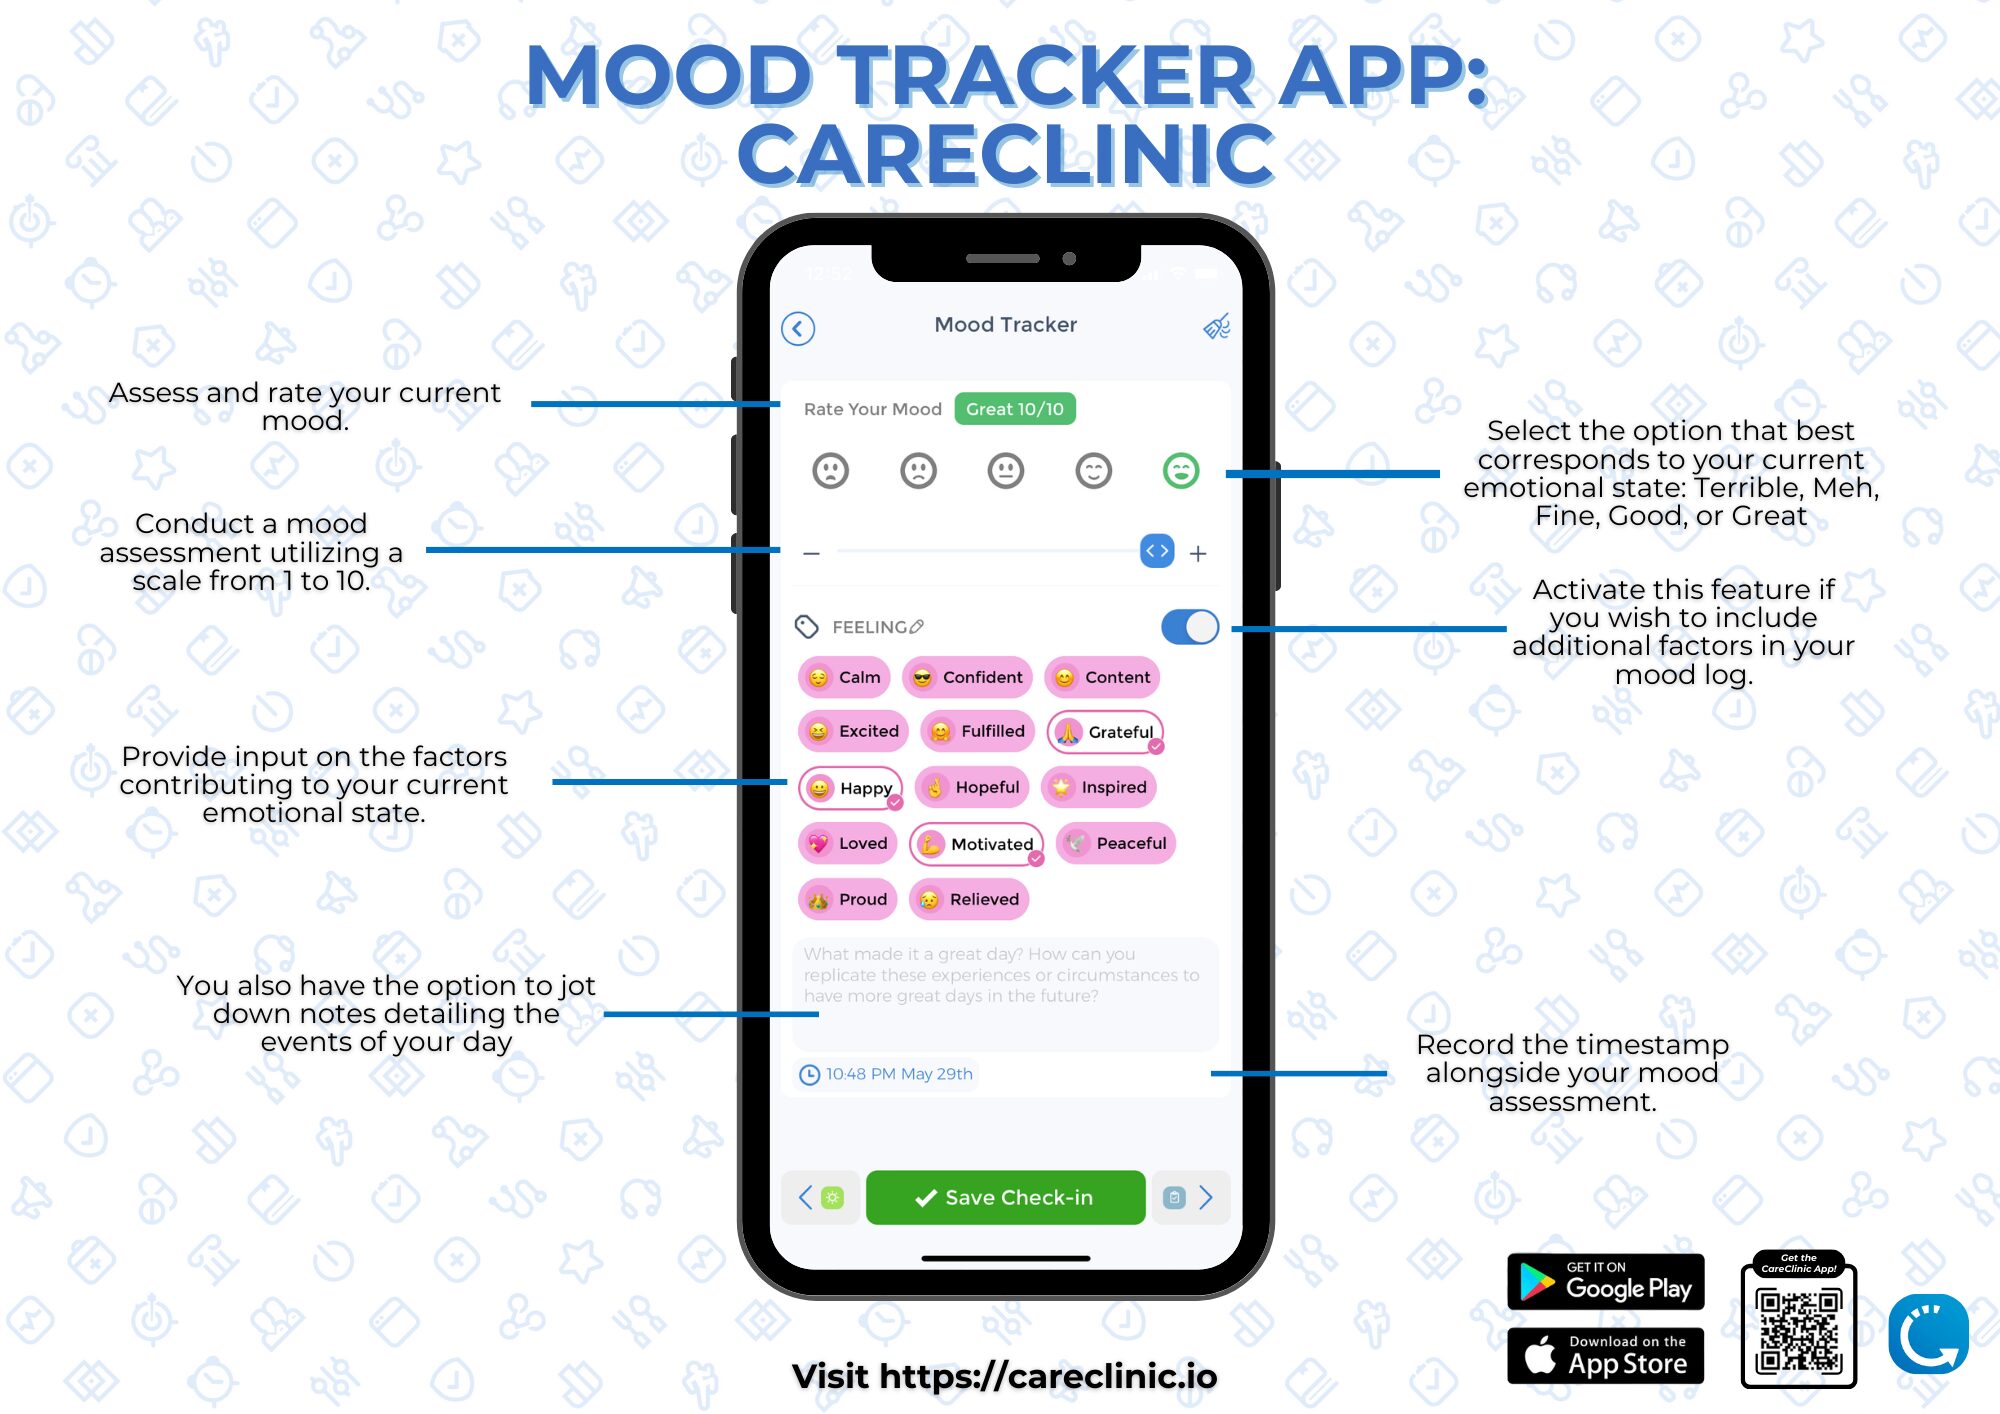 Why You Should Use Mood Tracker Apps